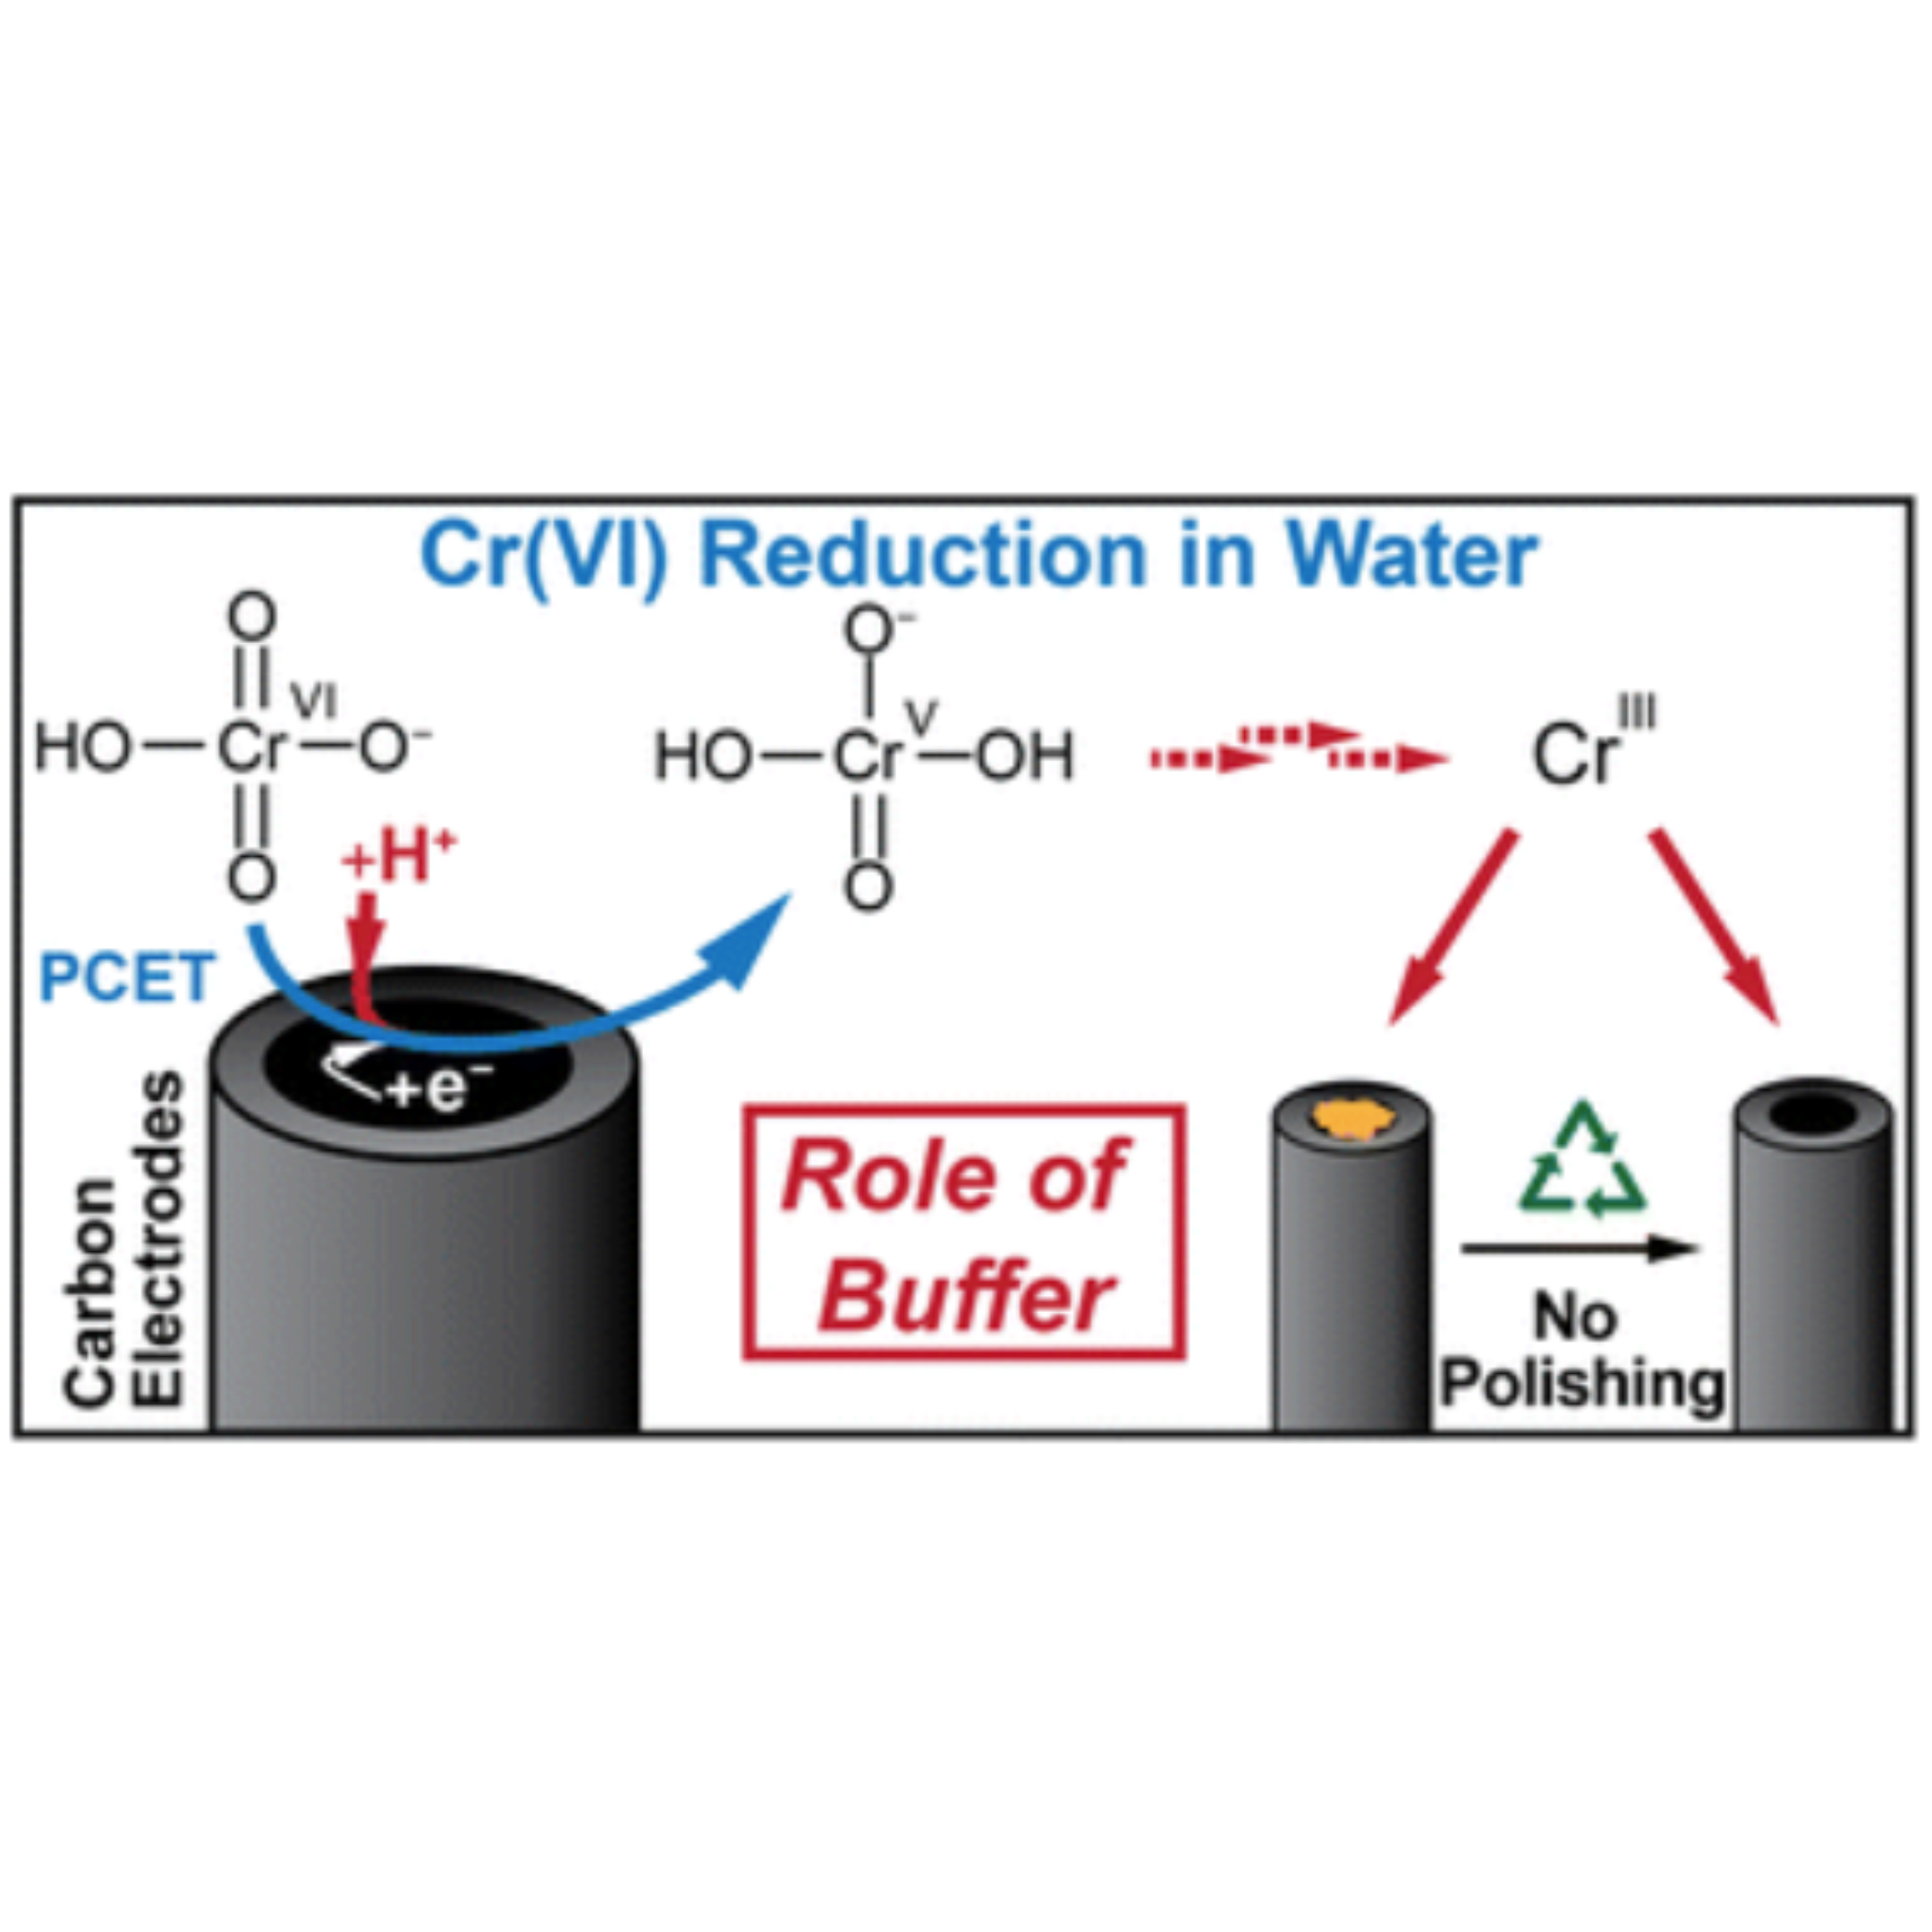 Cr(V) reduction in drinking water and the role of the buffer illustration